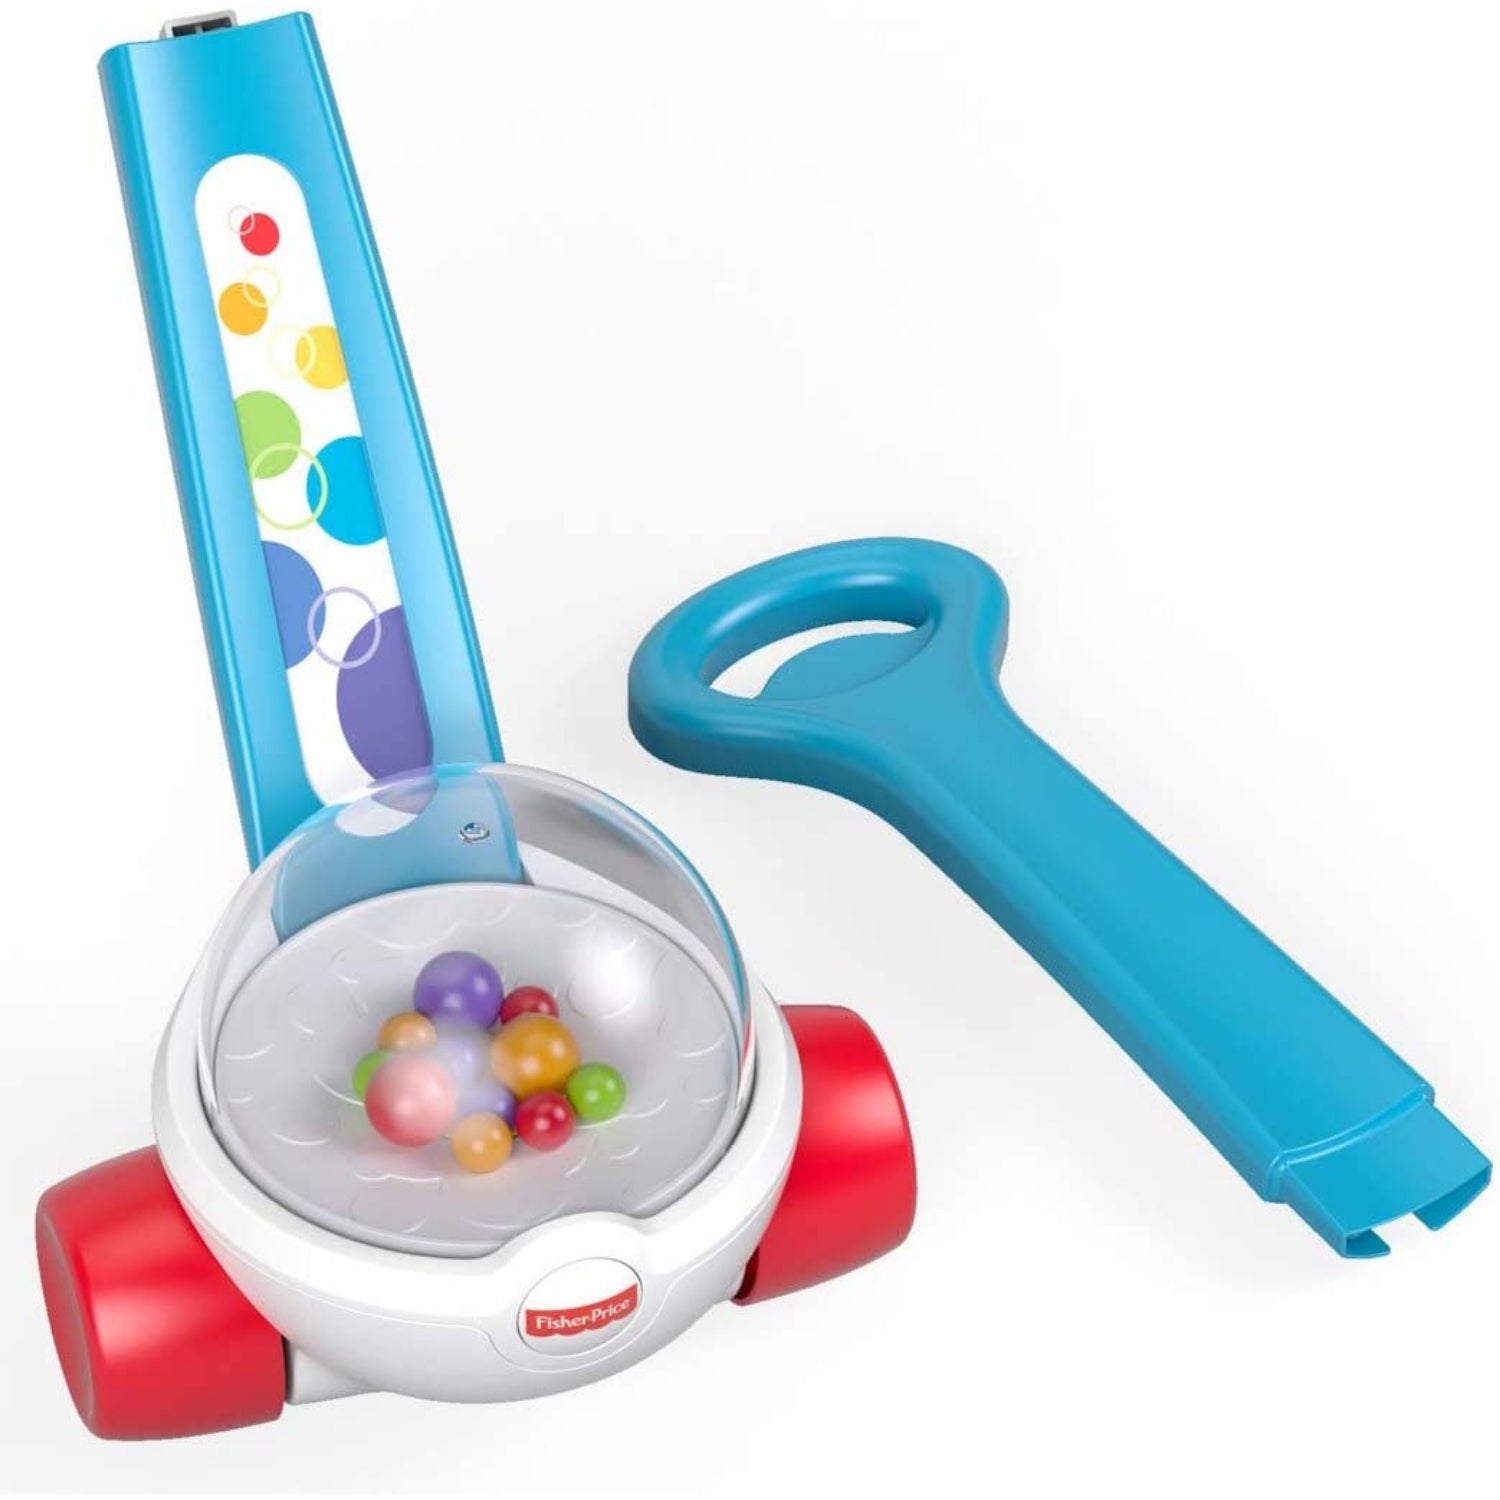  Fisher-Price Corn Popper Baby to Toddler Push Toy with